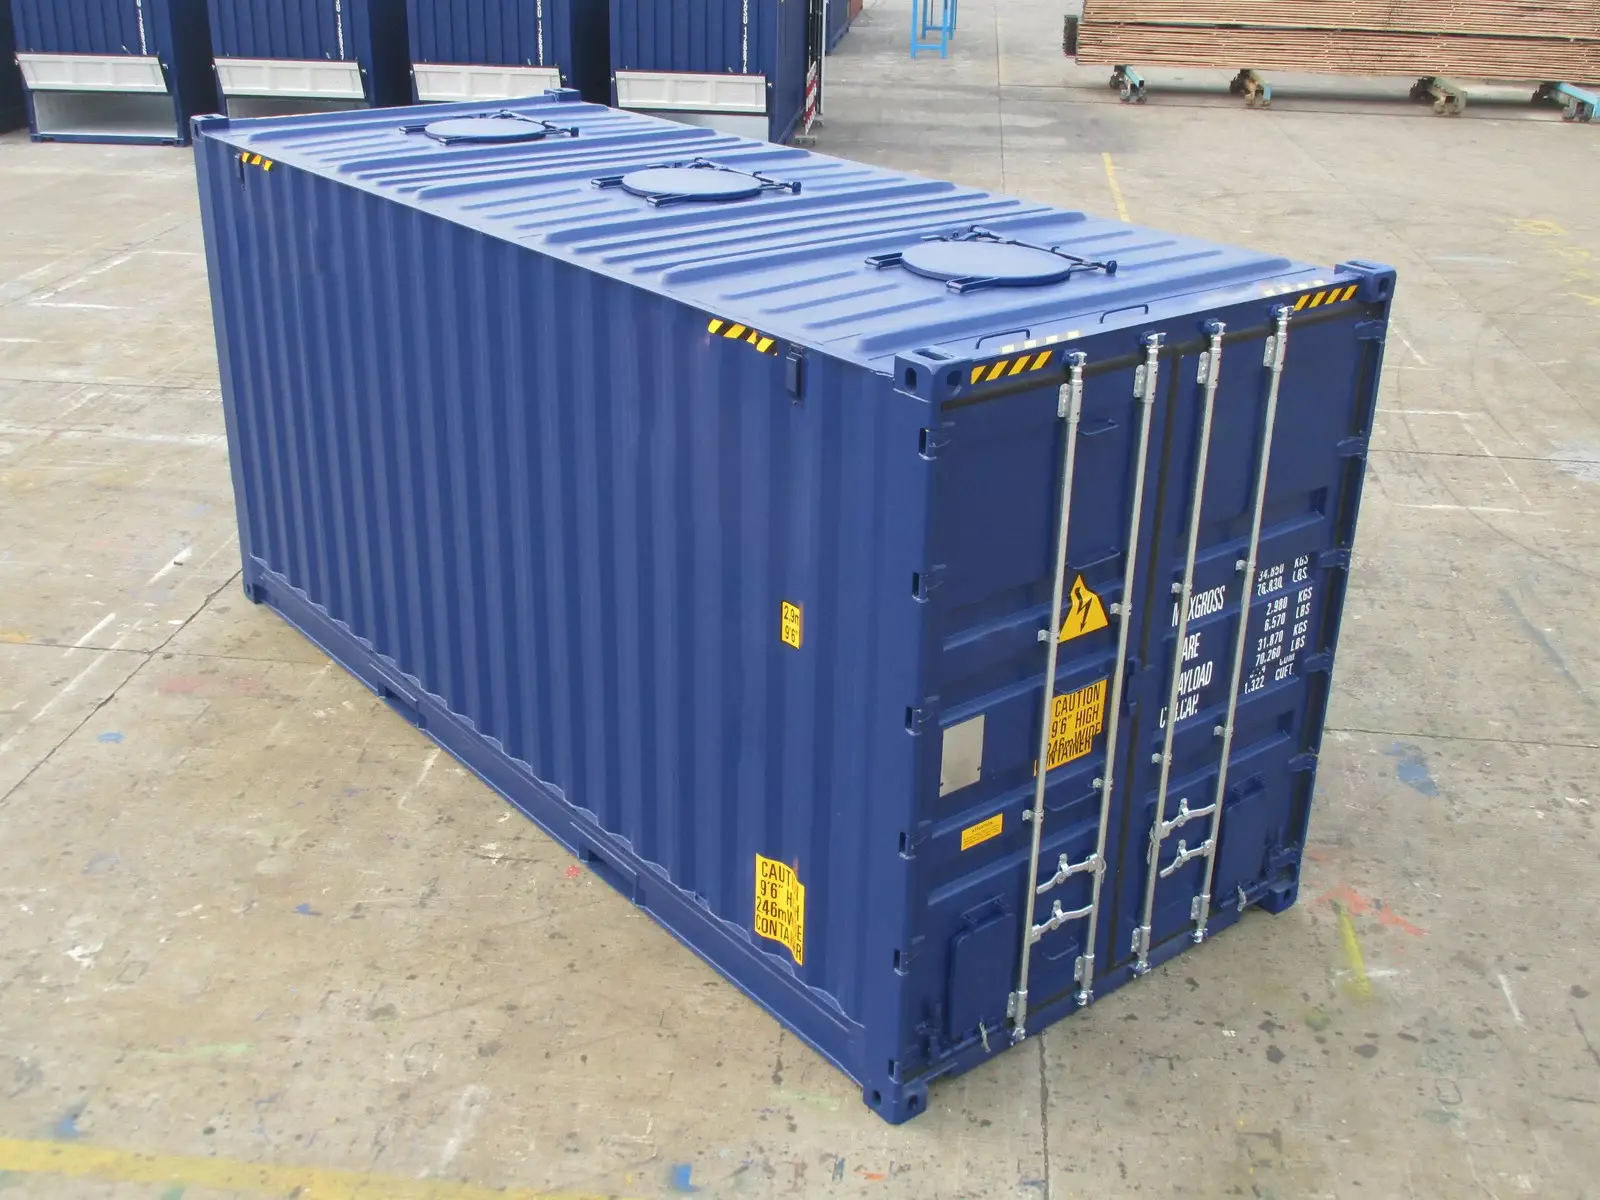 Shipping Containers For Sale in Eastvale